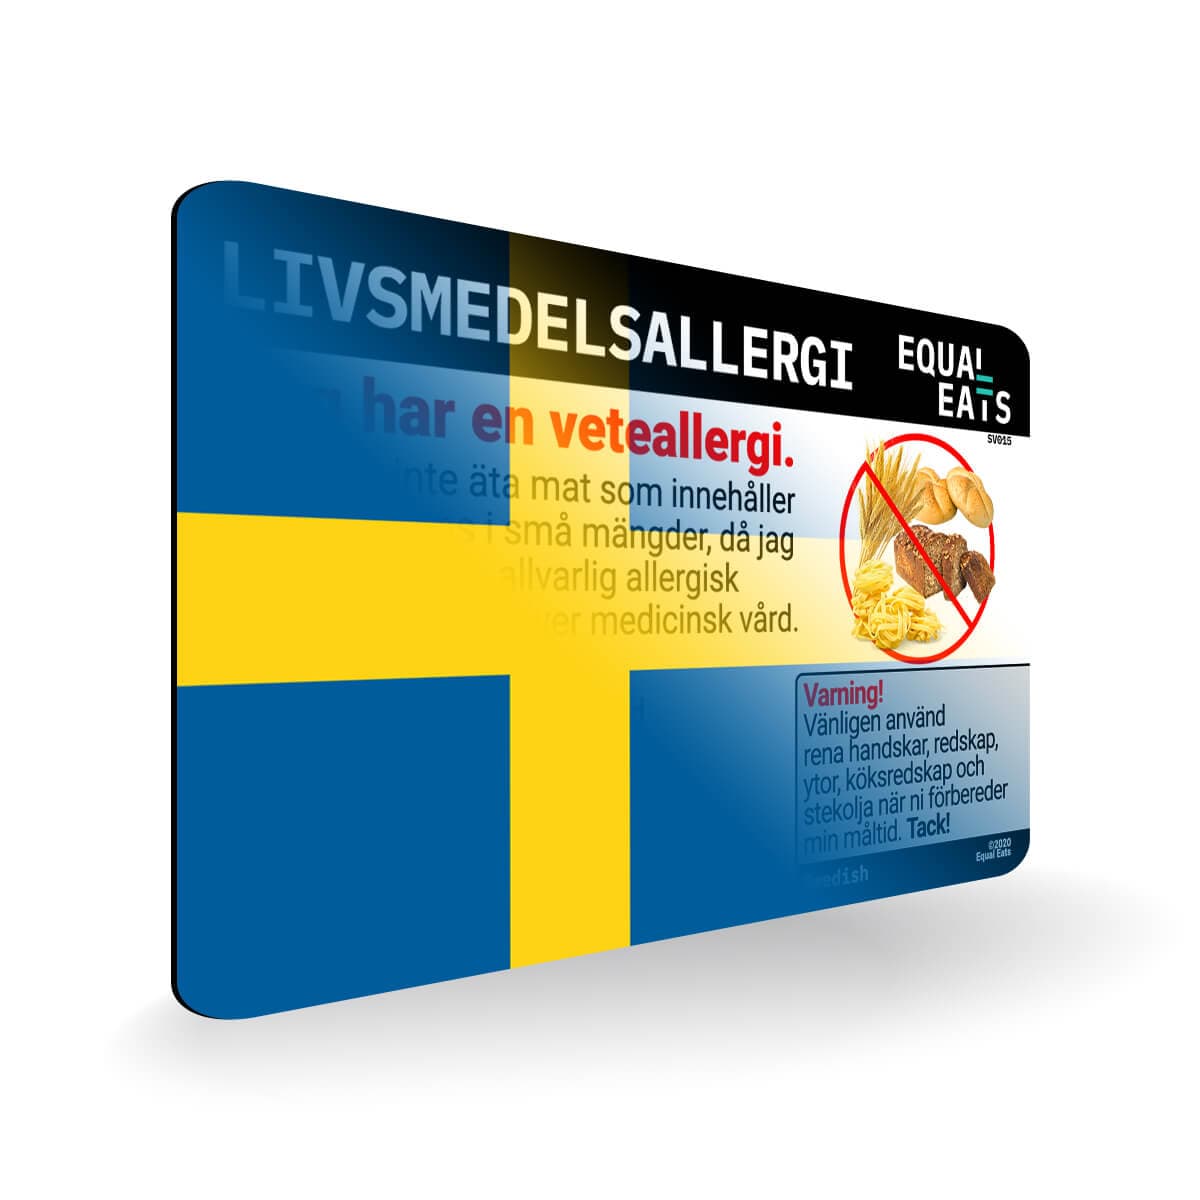 Wheat Allergy in Swedish. Wheat Allergy Card for Sweden